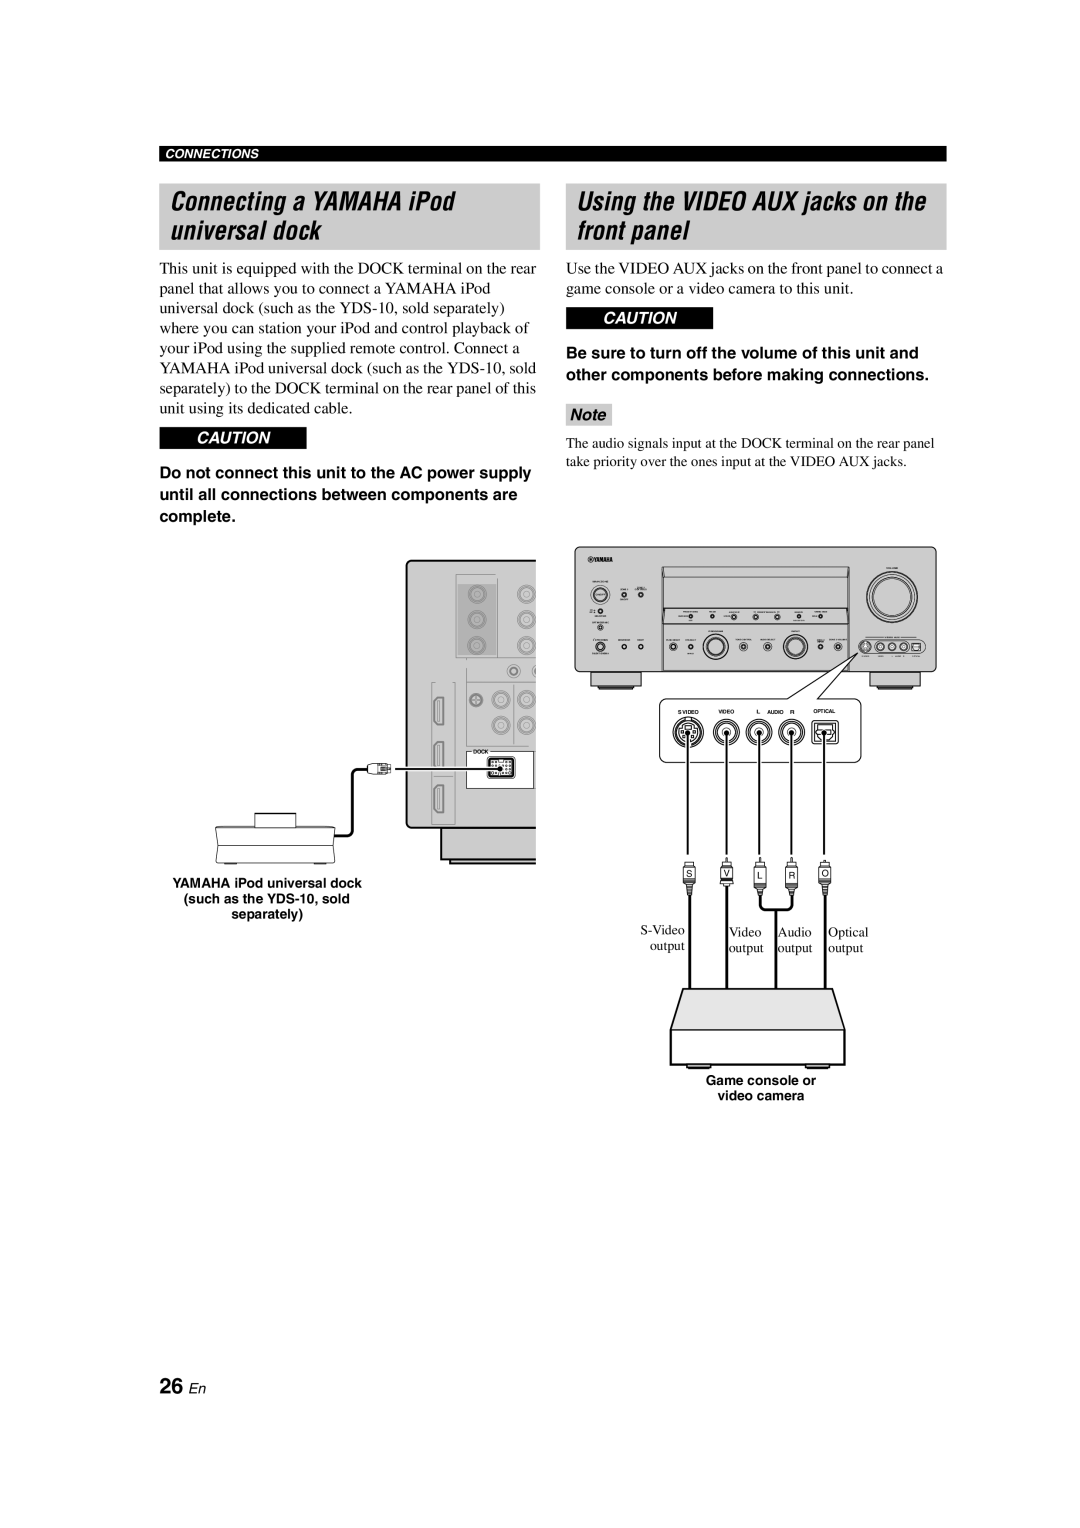 Yamaha HTR-6090 owner manual Using the VIDEO AUX jacks on the front panel, Connecting a YAMAHA iPod universal dock, 26 En 